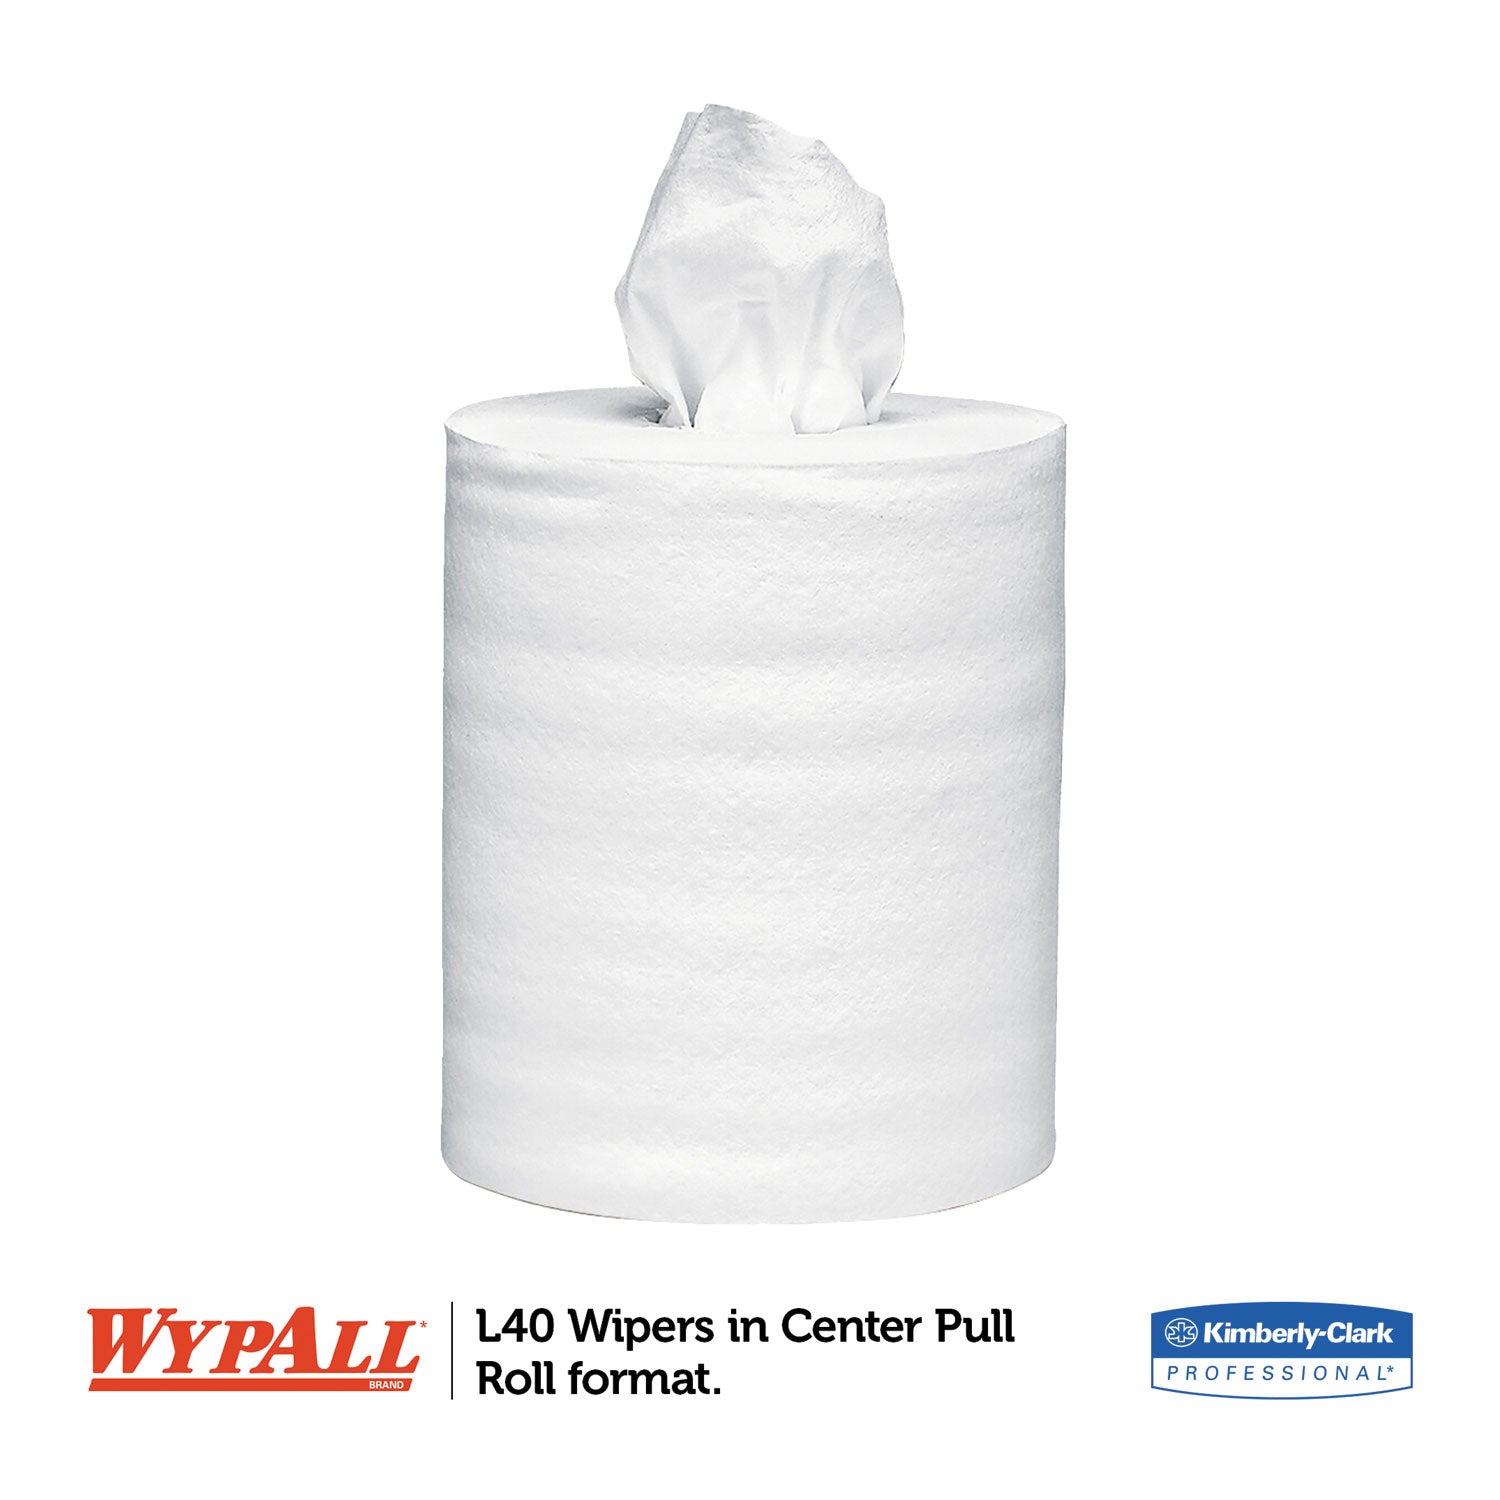 l40-towels-center-pull-10-x-132-white-200-roll-2-carton_kcc05796 - 2